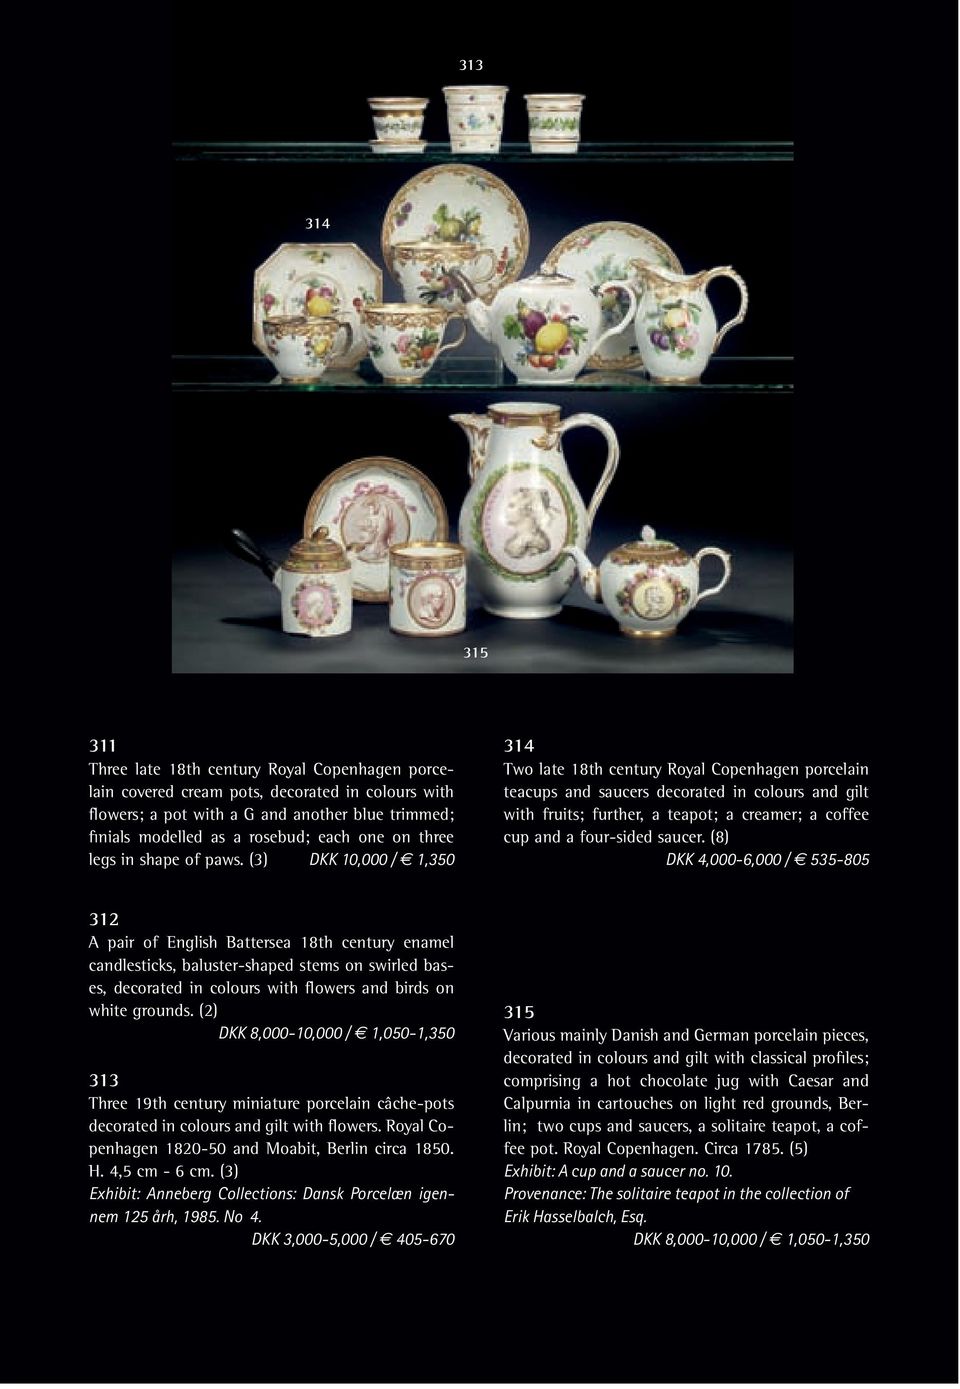 (3) DKK 10,000 / 1,350 314 Two late 18th century Royal Copenhagen porcelain teacups and saucers decorated in colours and gilt with fruits; further, a teapot; a creamer; a coffee cup and a four-sided